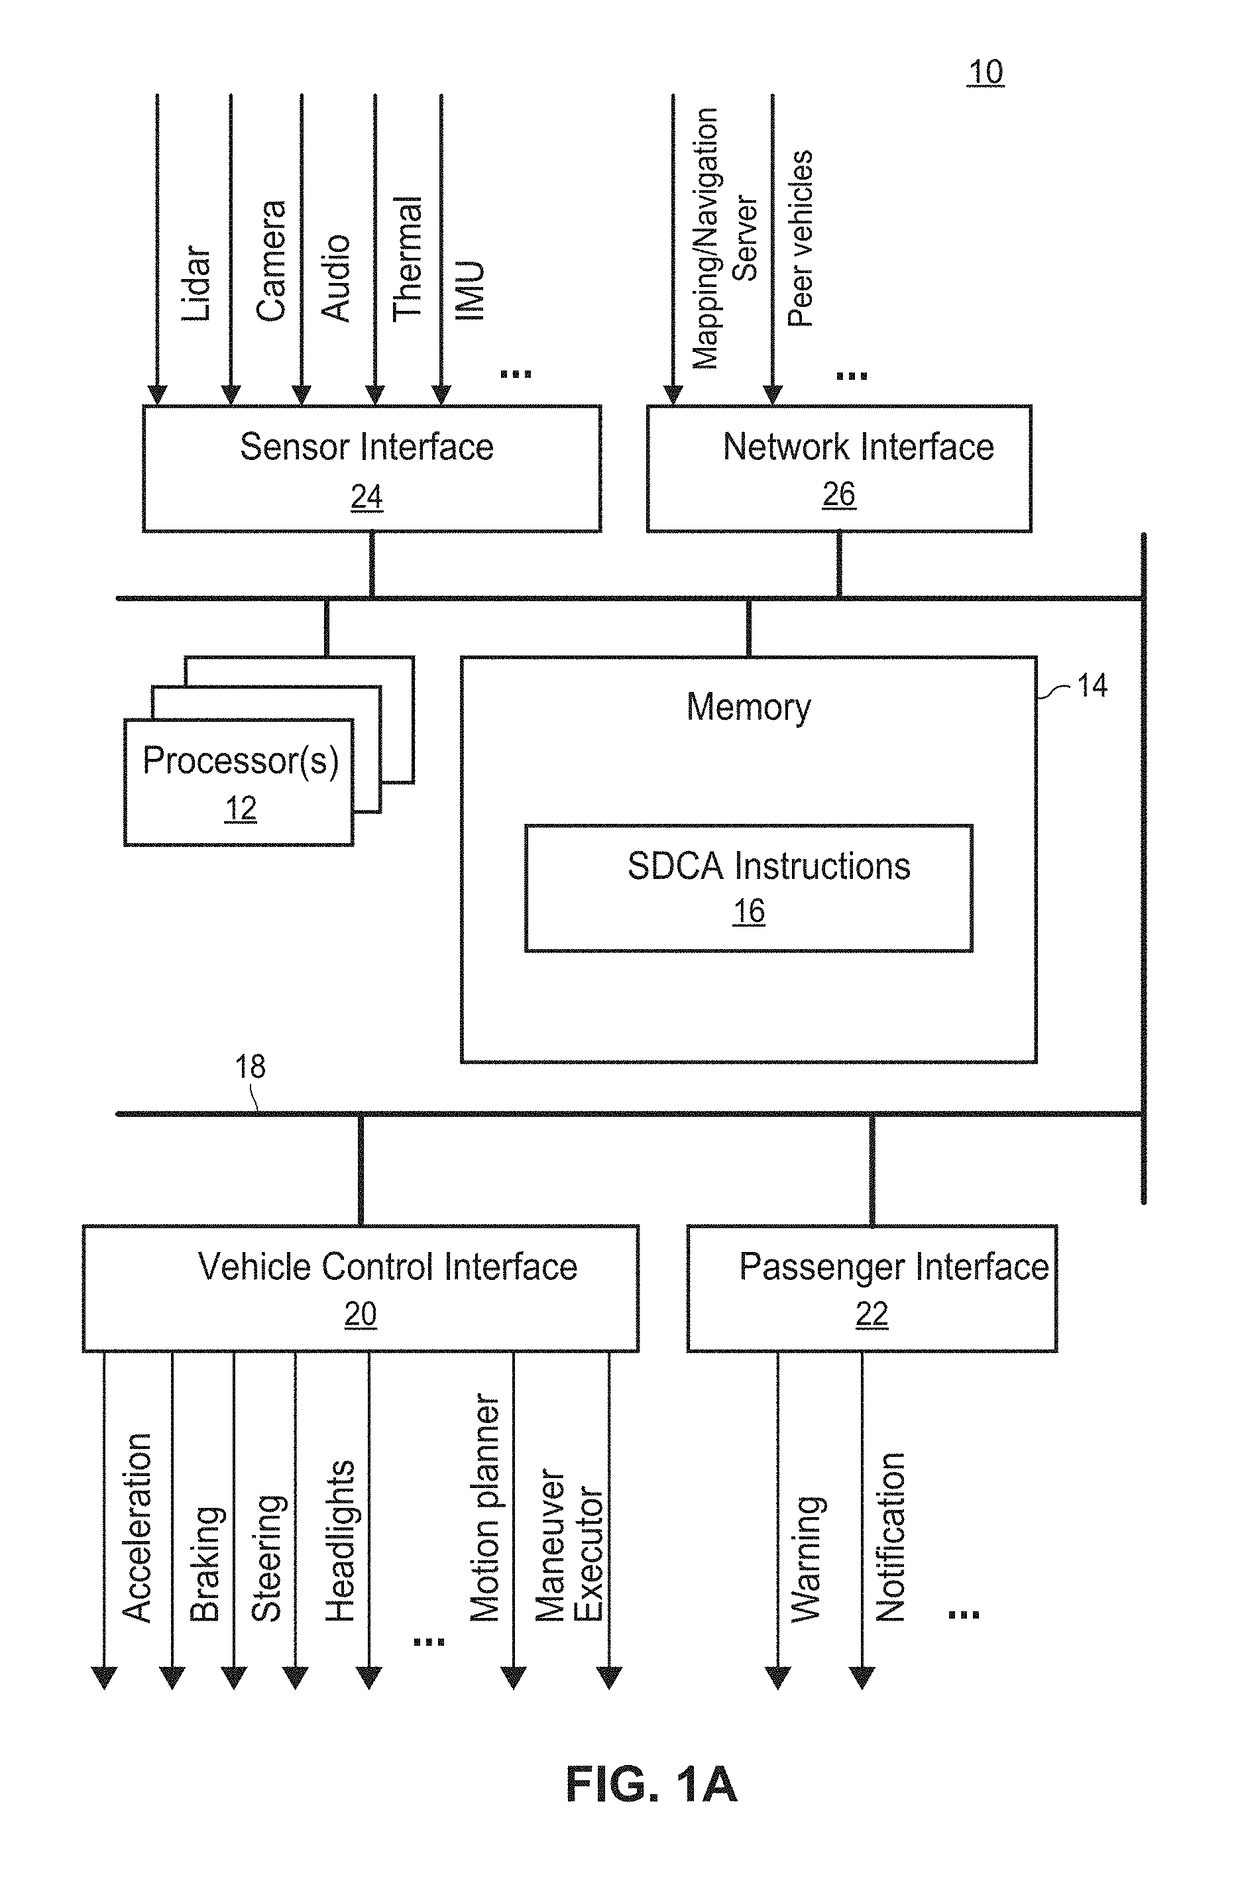 Object identification and labeling tool for training autonomous vehicle controllers